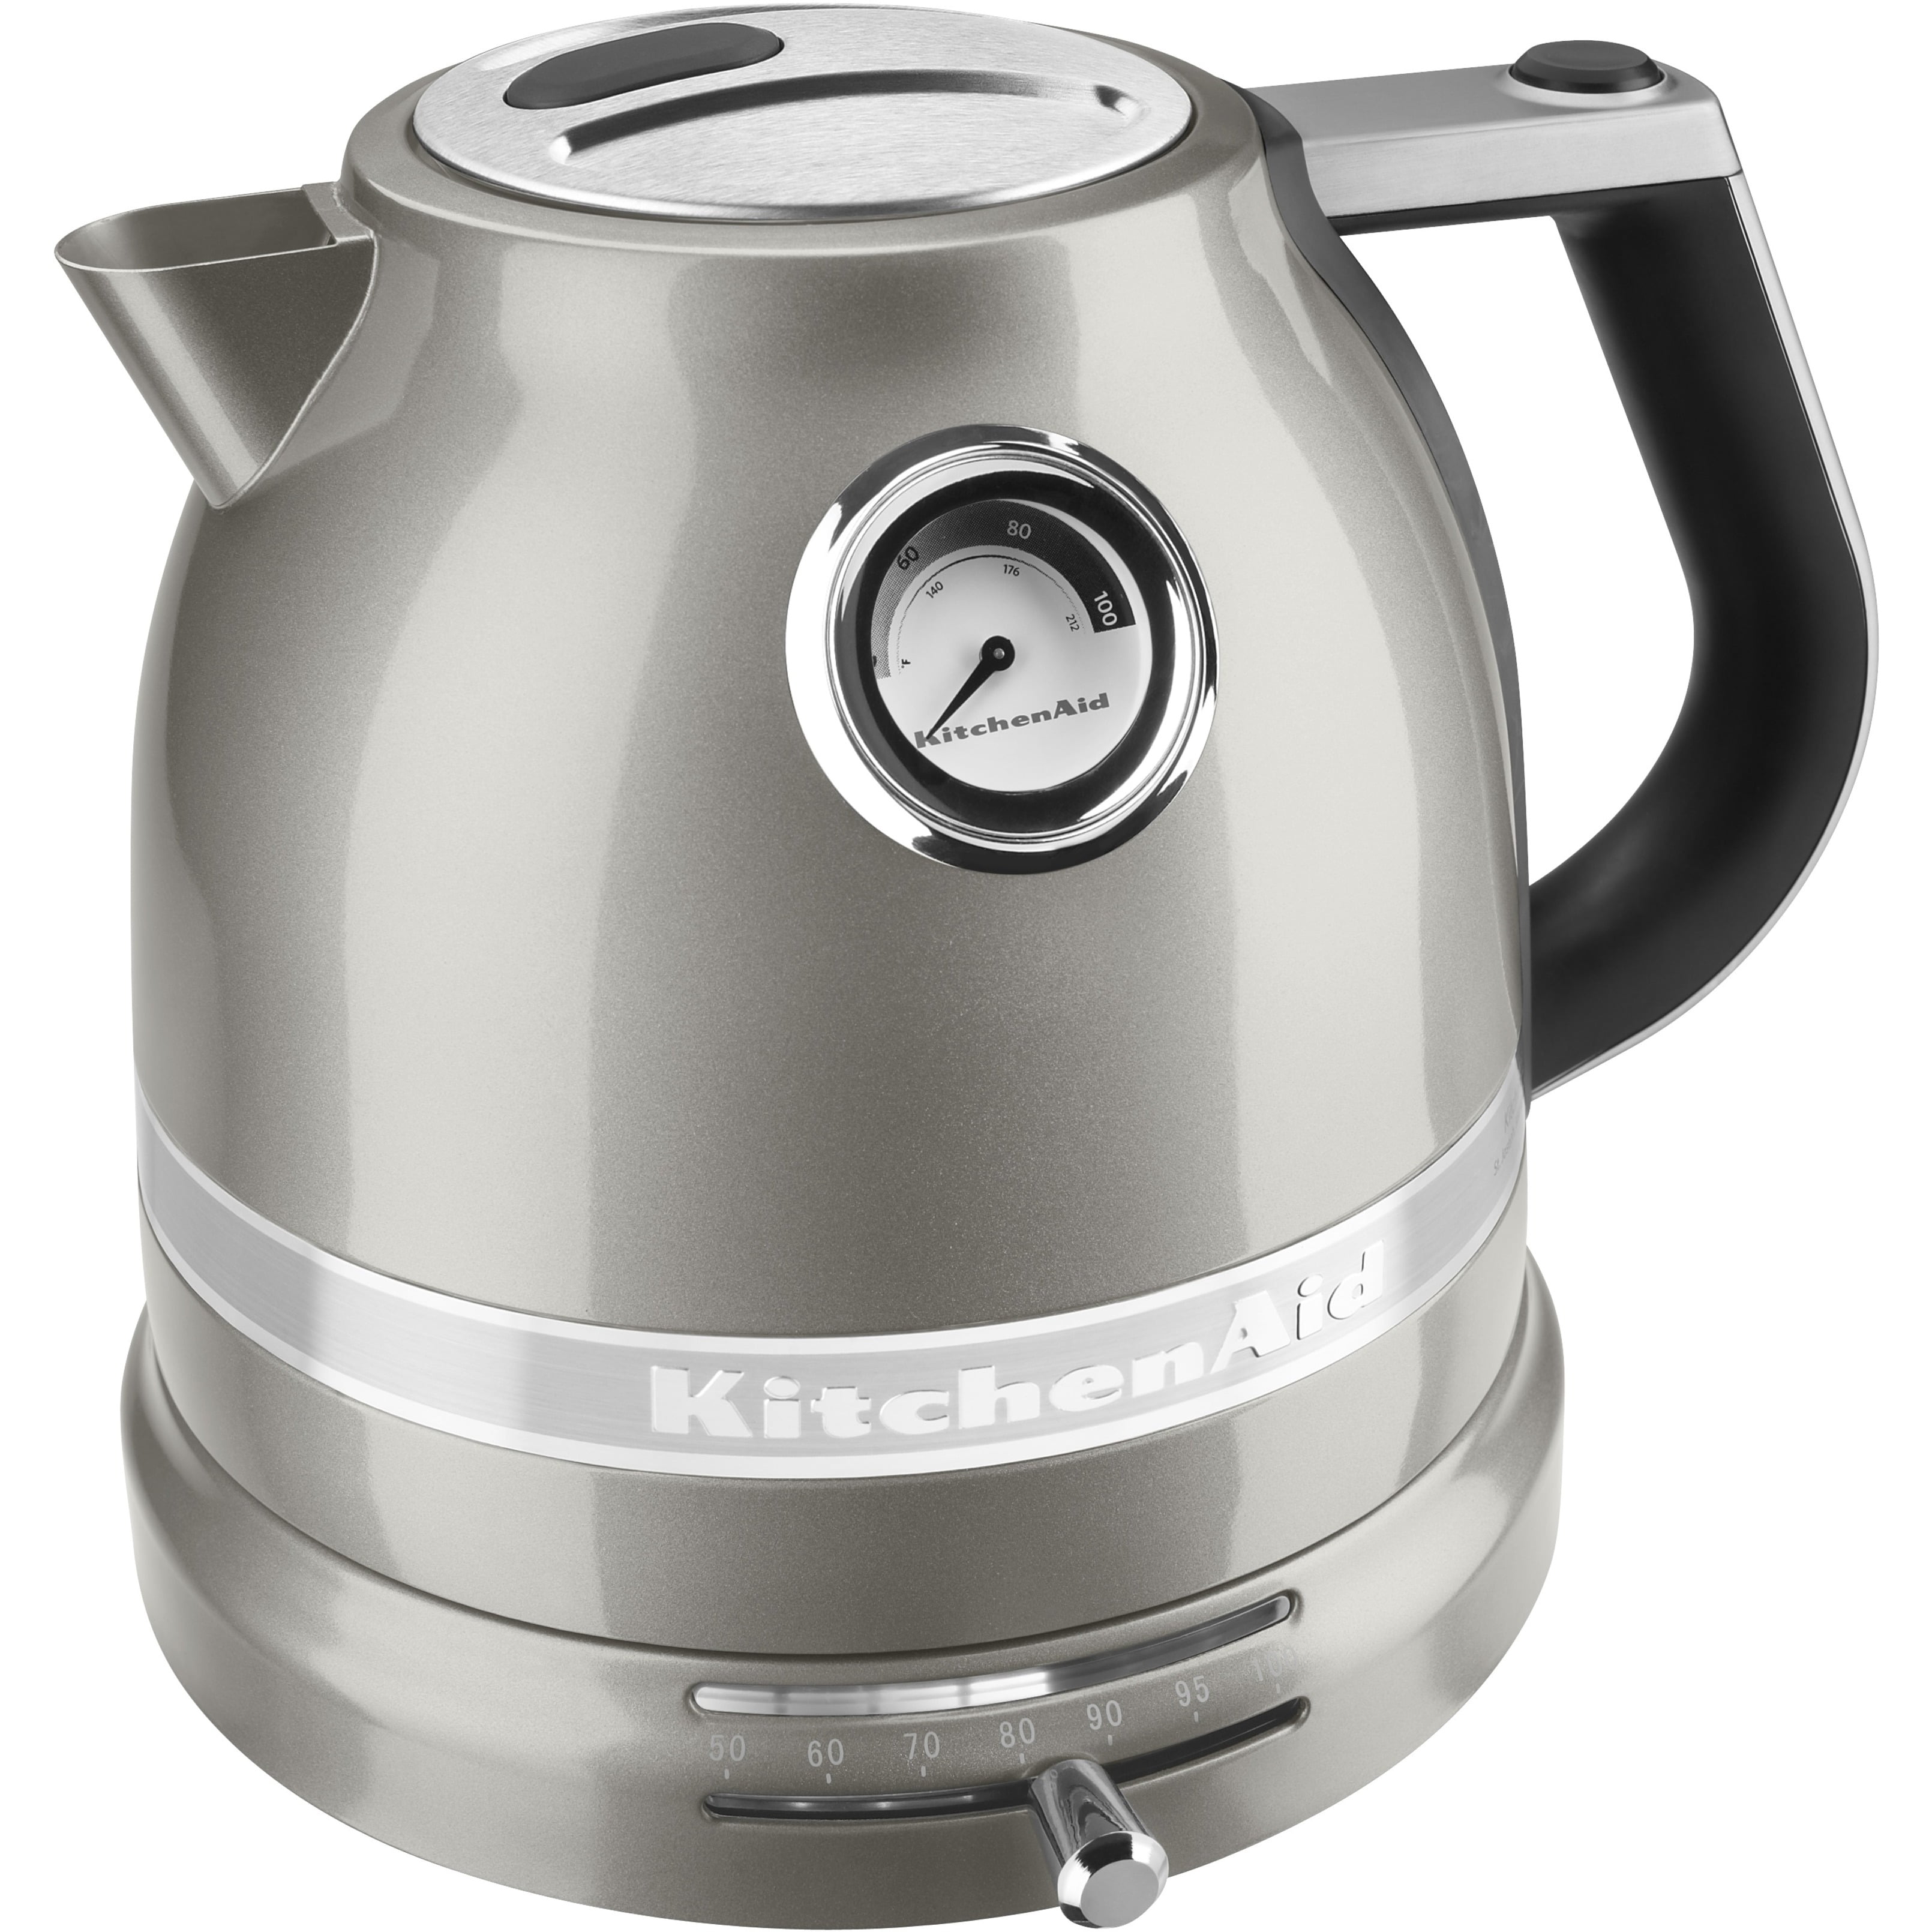 KitchenAid 1.5 L Pro Line Series Electric Kettle in Candy Apple